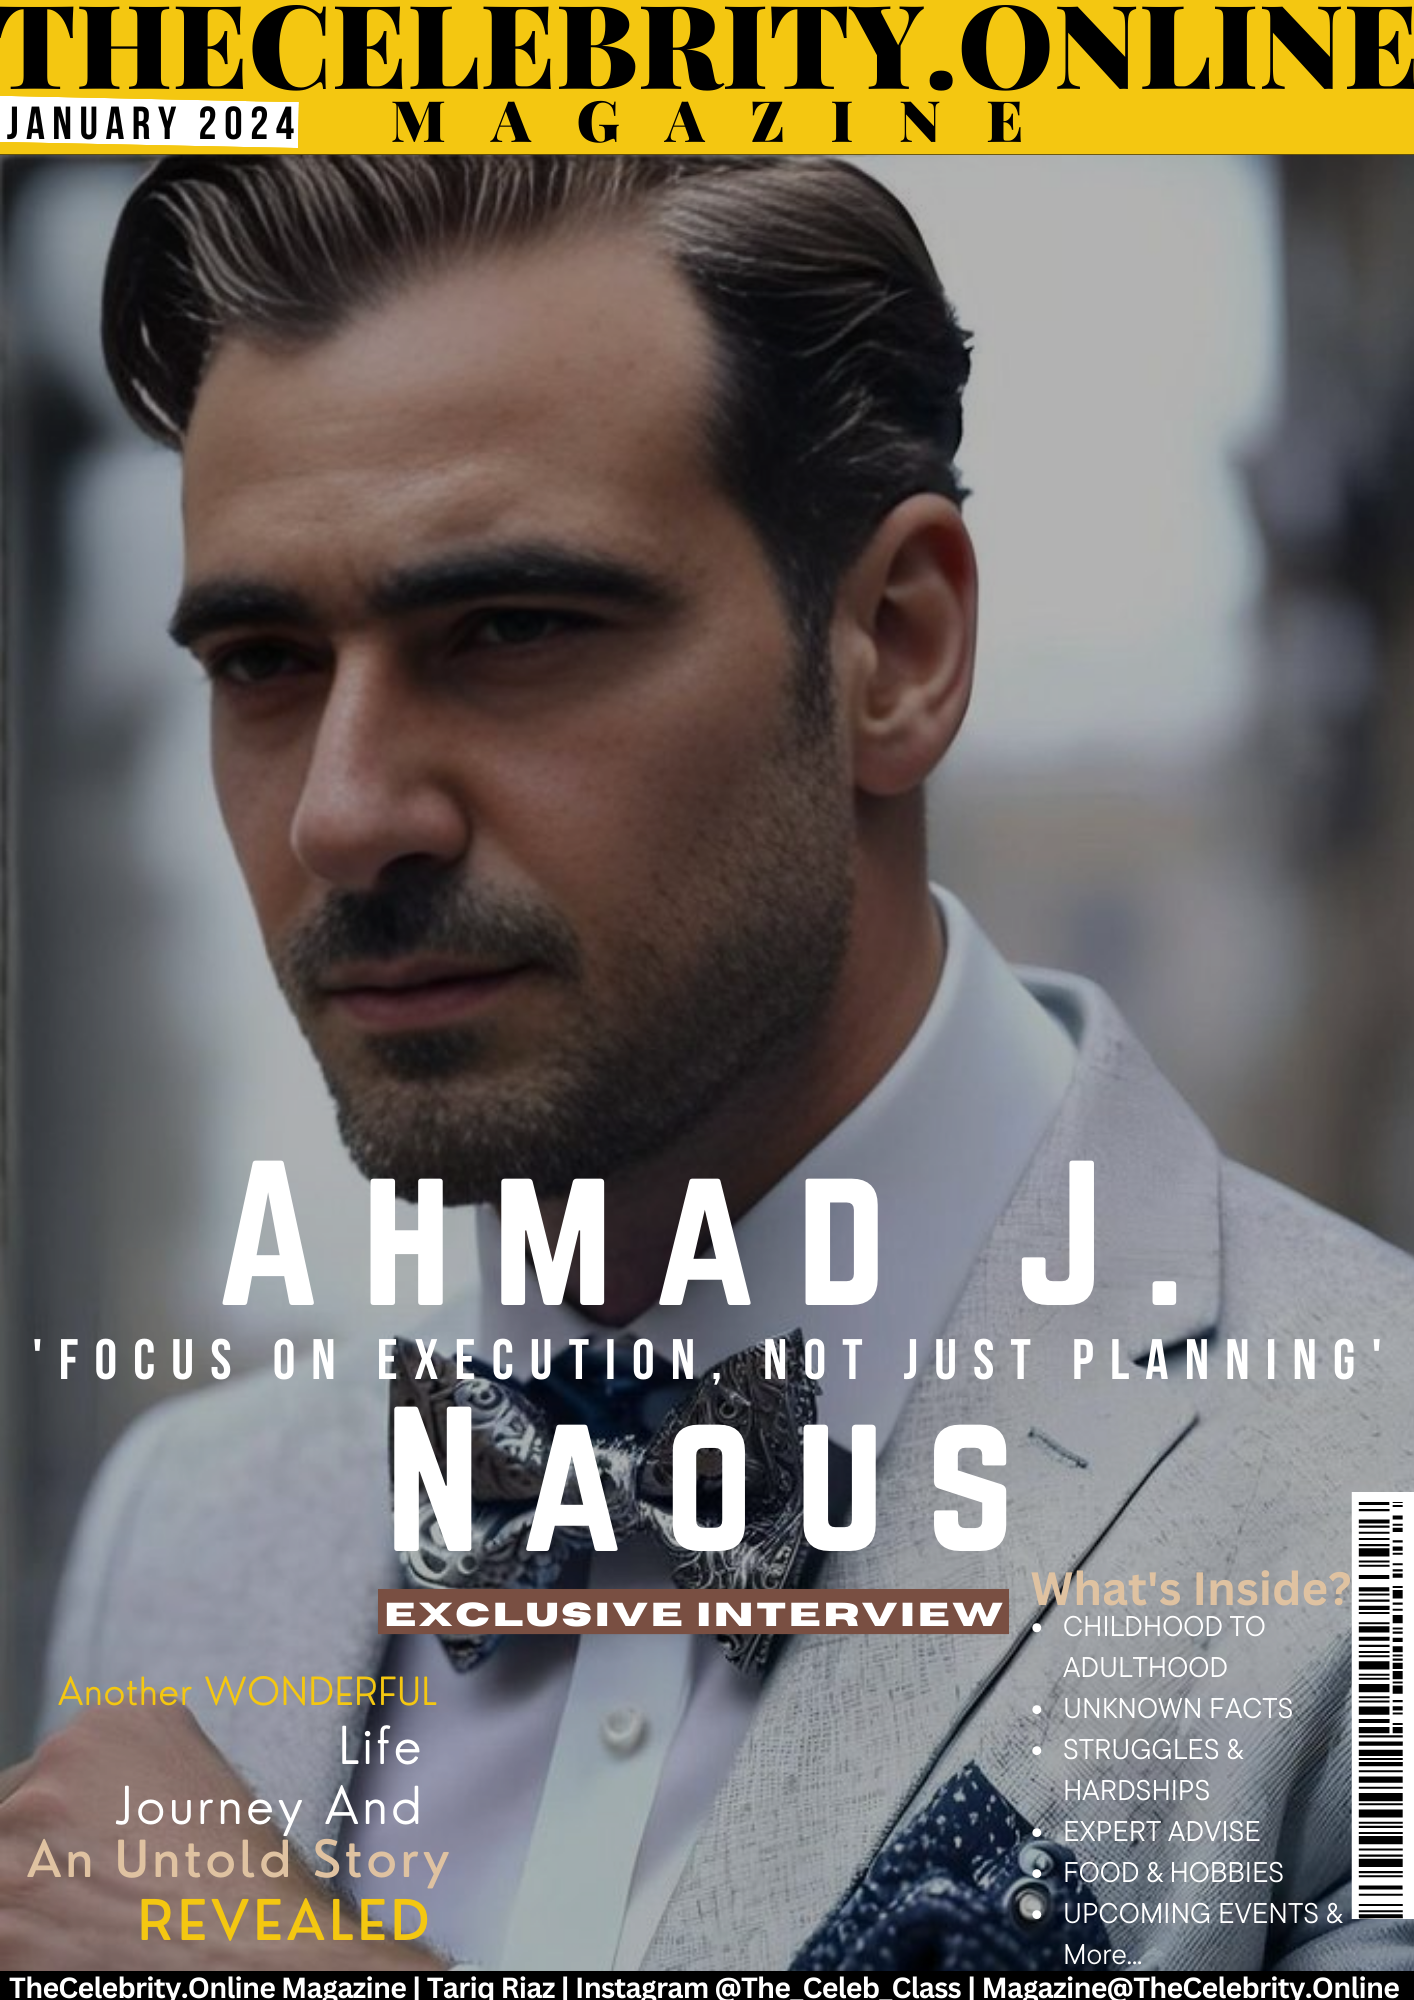 Ahmad J. Naous Exclusive Interview – ‘Focus On Execution, Not Just Planning’